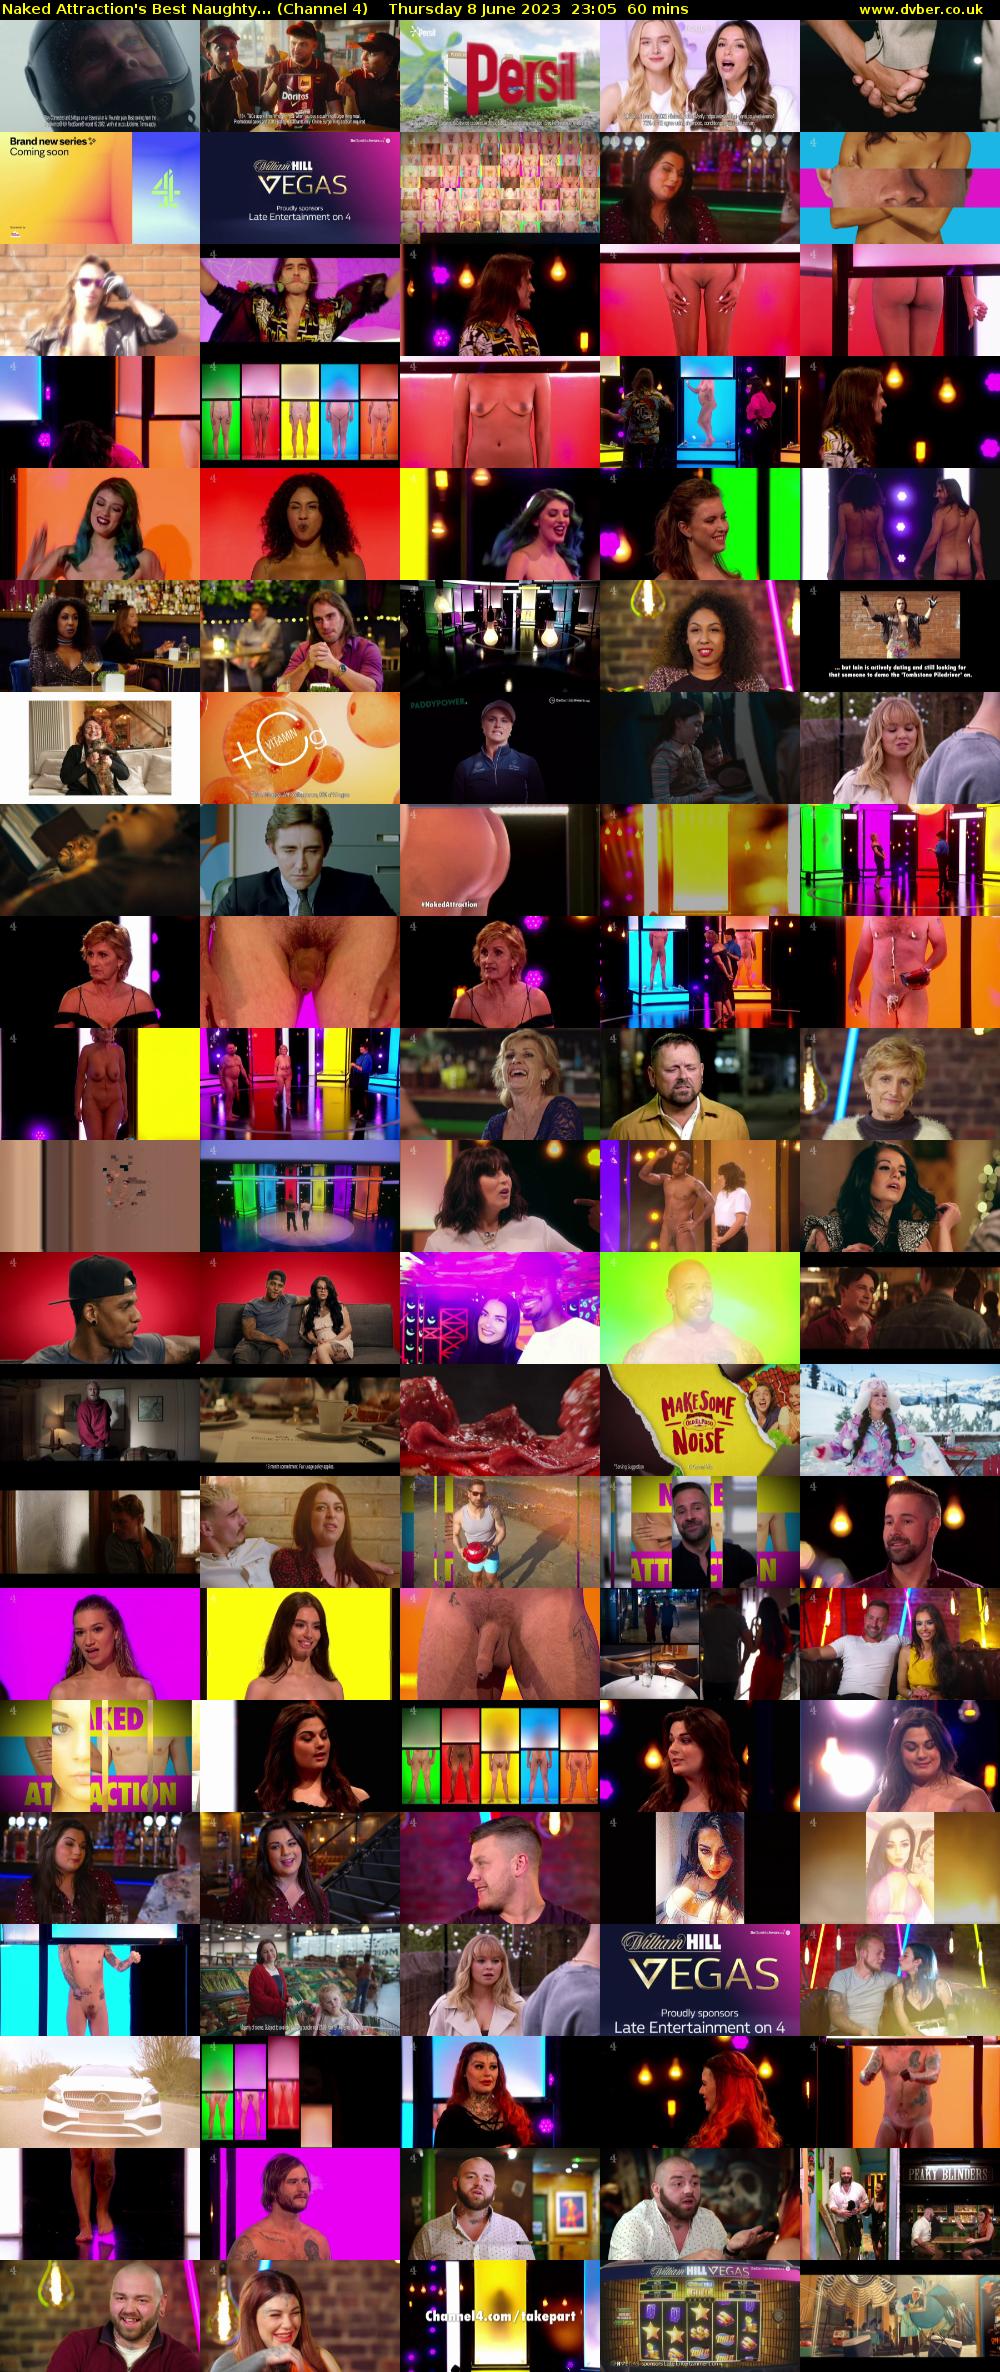 Naked Attraction's Best Naughty... (Channel 4) Thursday 8 June 2023 23:05 - 00:05